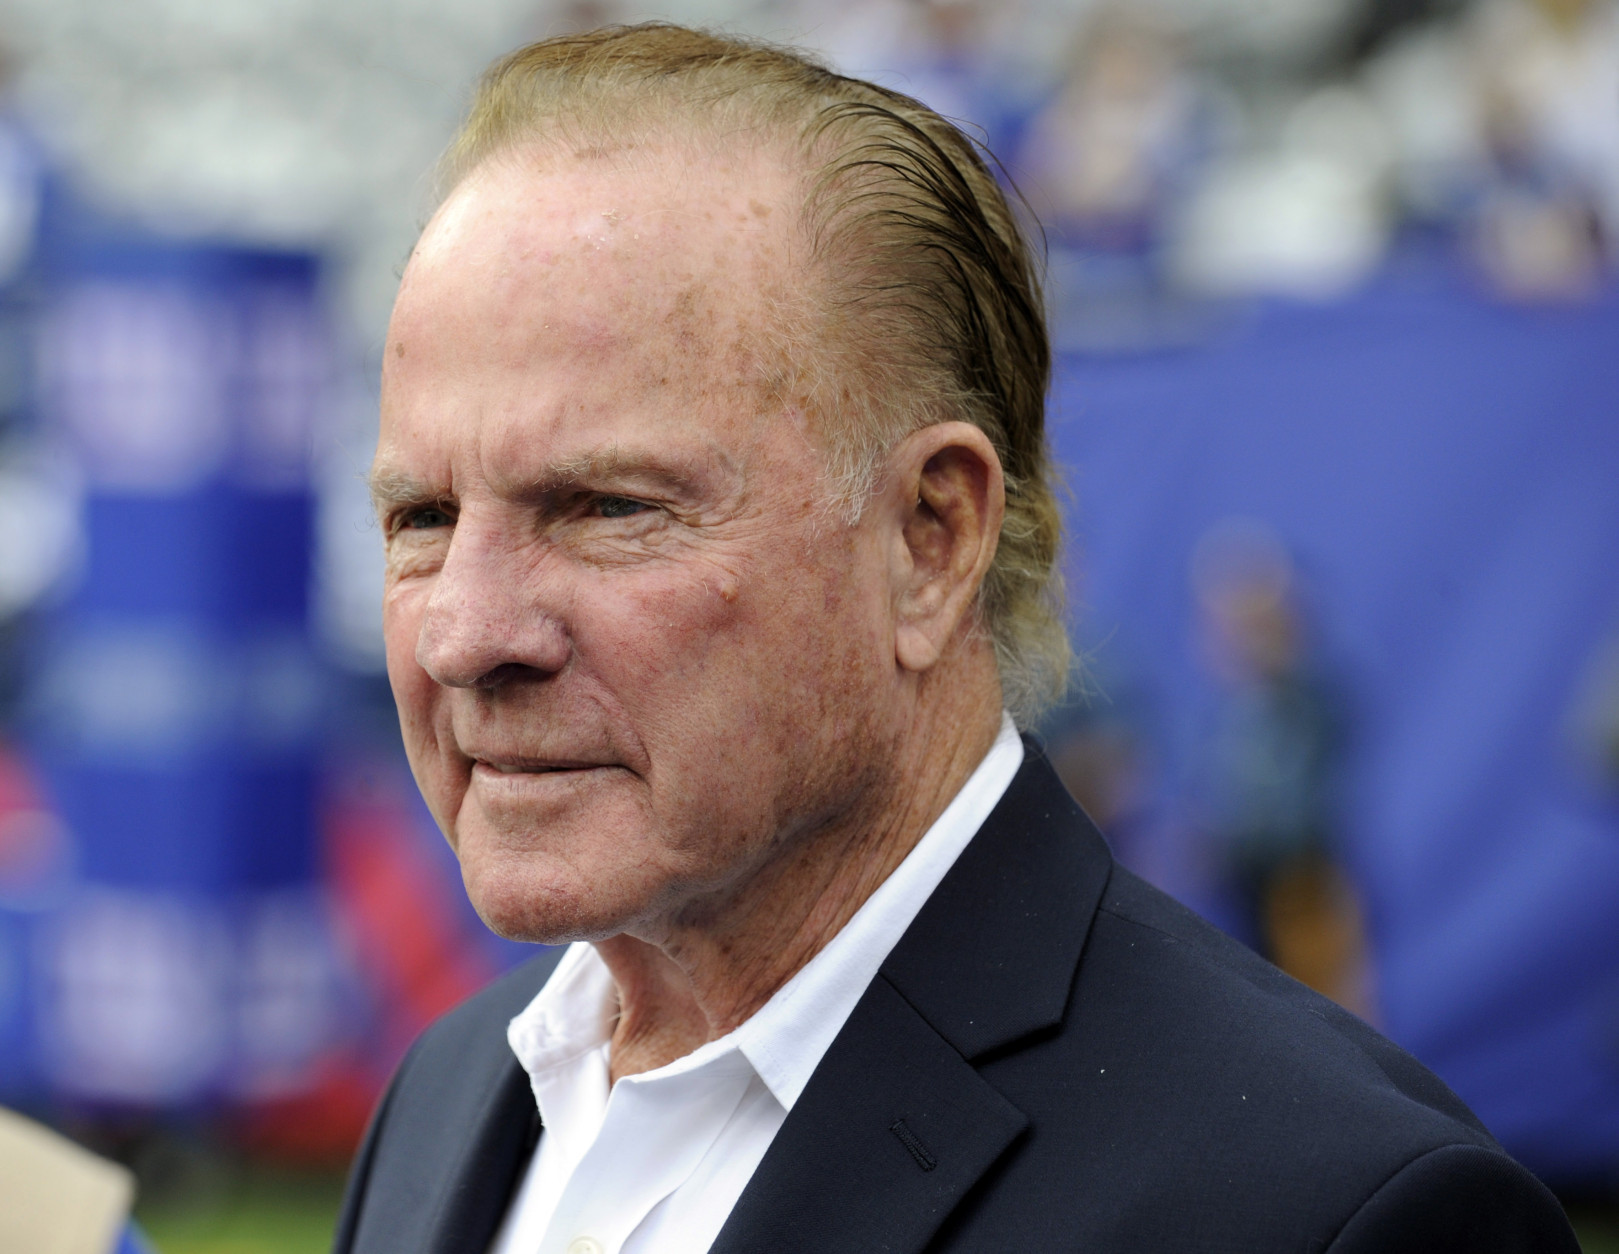 FILE - In this Sept. 15, 2013 file photo, former New York Giants player Frank Gifford looks on before an NFL football game between the New York Giants and the Denver Broncos in East Rutherford, N.J. Gifford's family on Sunday, Aug. 9, 2015 said Gifford died suddenly of natural causes. He was 84. (AP Photo/Bill Kostroun, File)